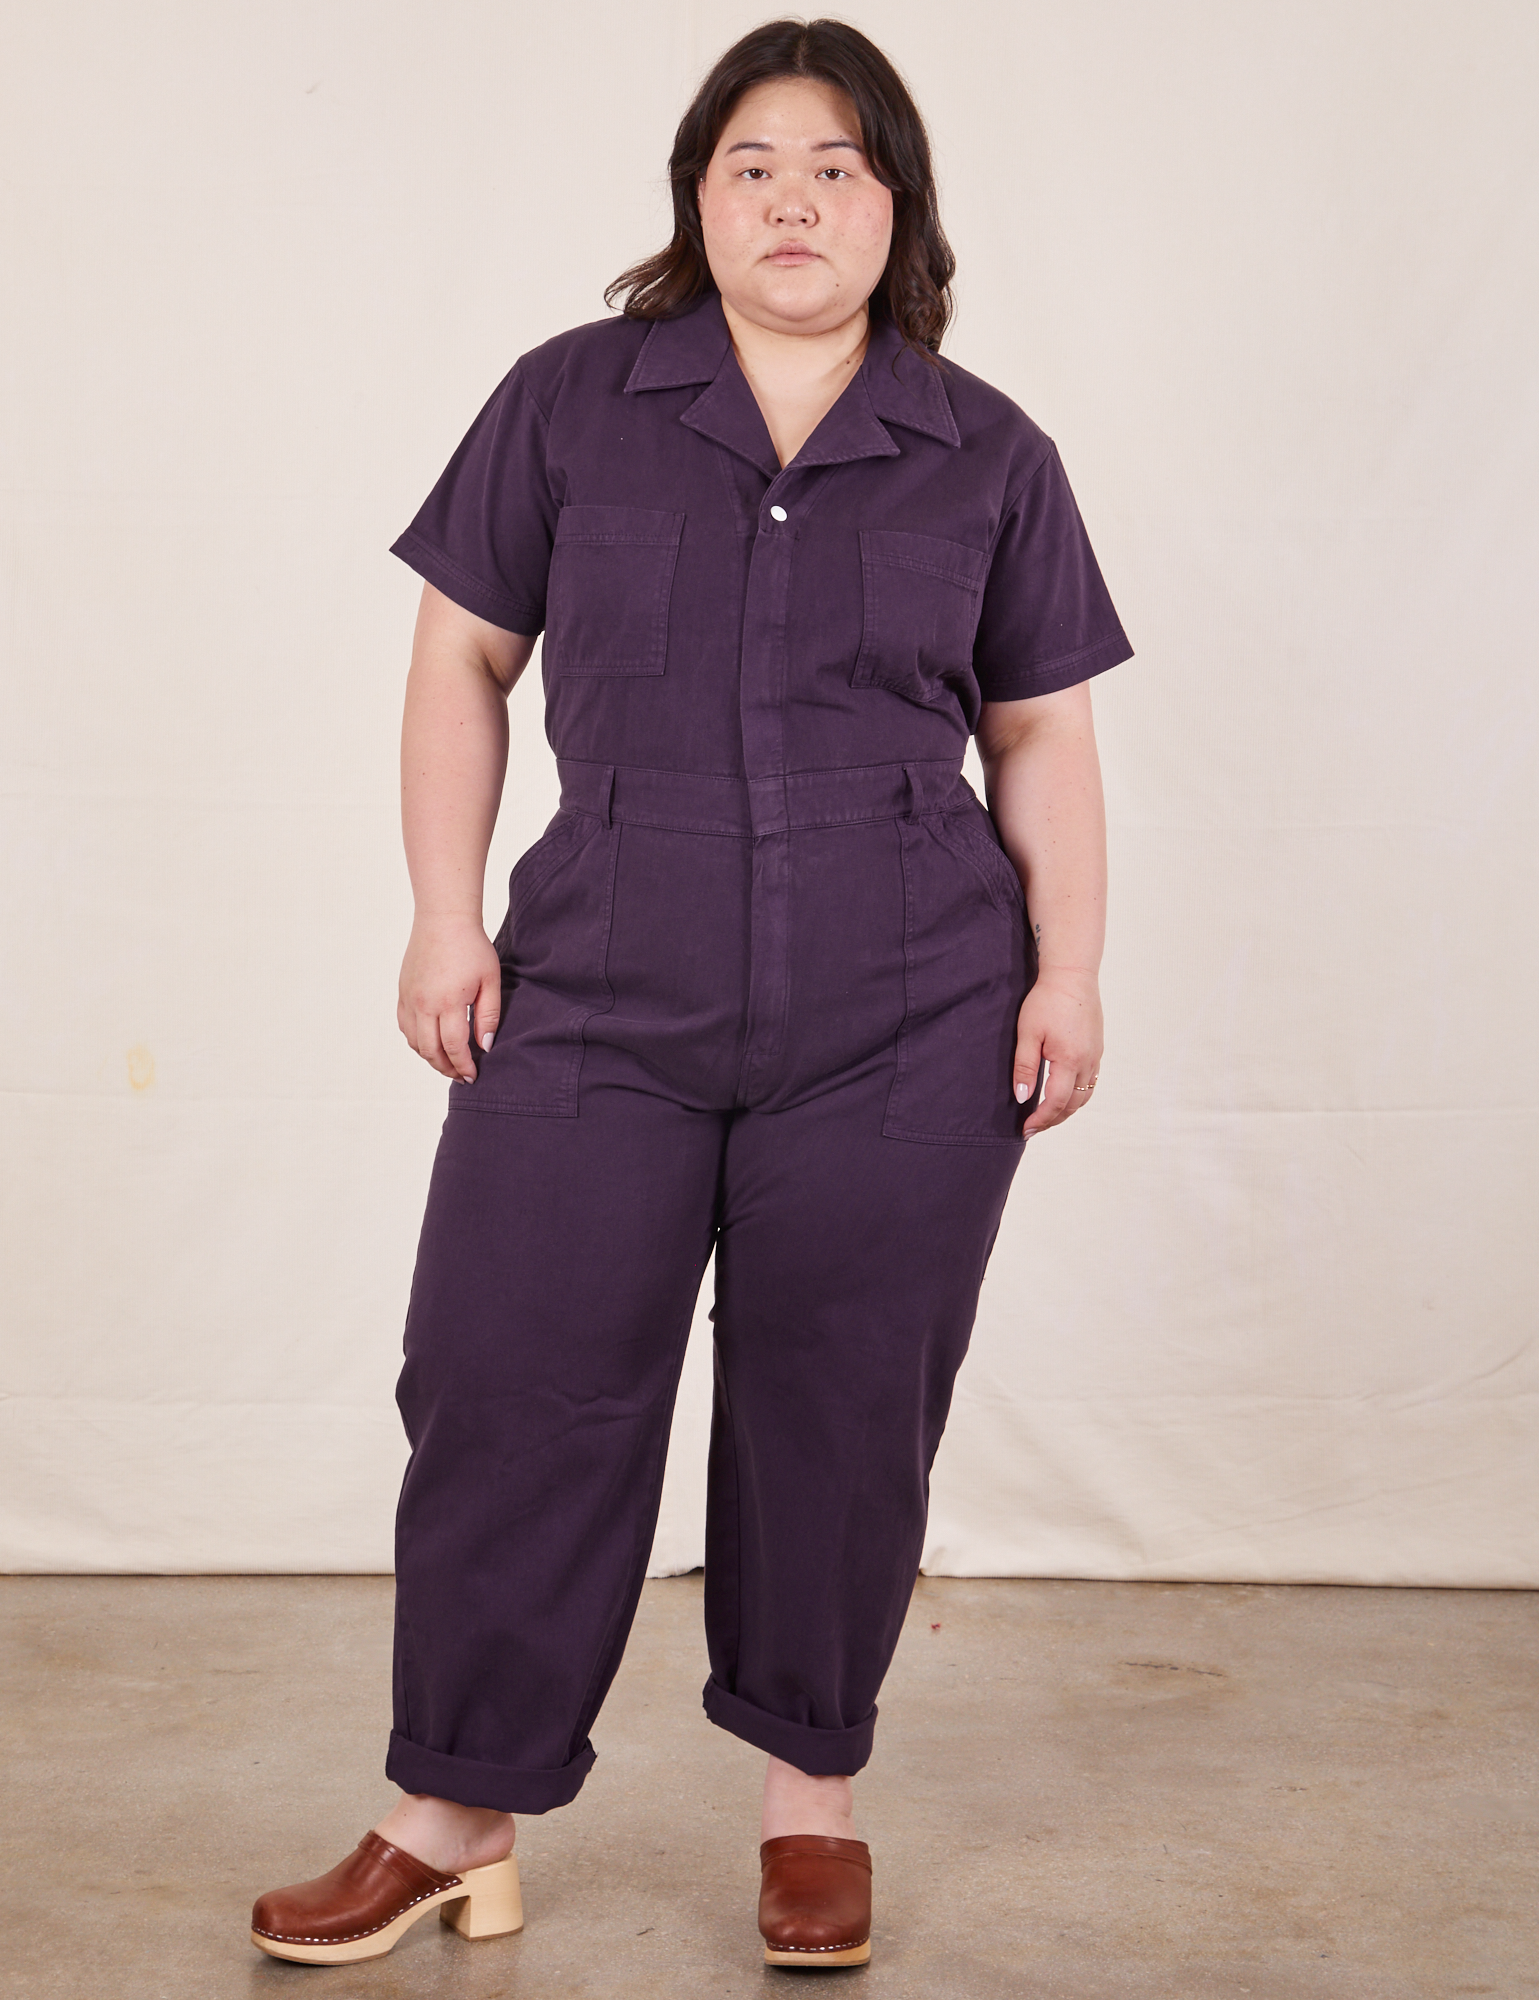 Ashley is 5&#39;7&quot; and wearing 1XL Short Sleeve Jumpsuit in Nebula Purple